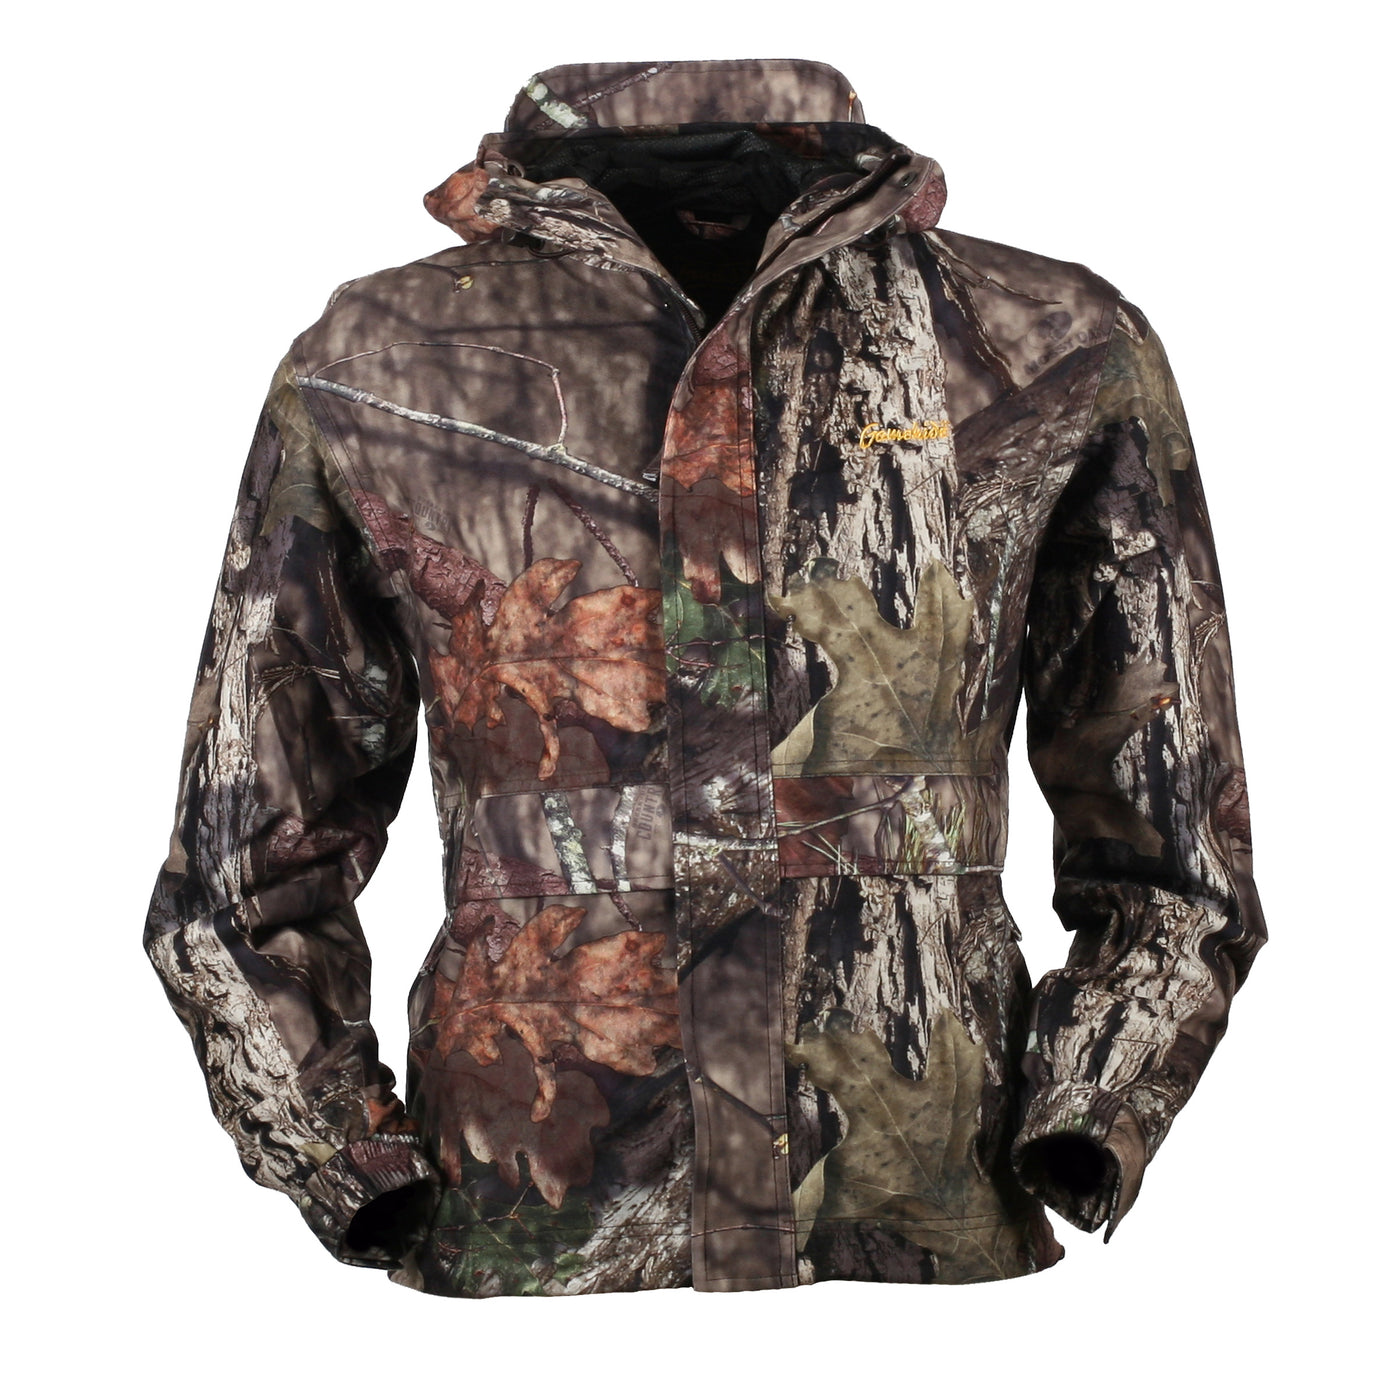 Gamehide Trails End Jacket-HUNTING/OUTDOORS-M-Break-Up Country-Kevin's Fine Outdoor Gear & Apparel